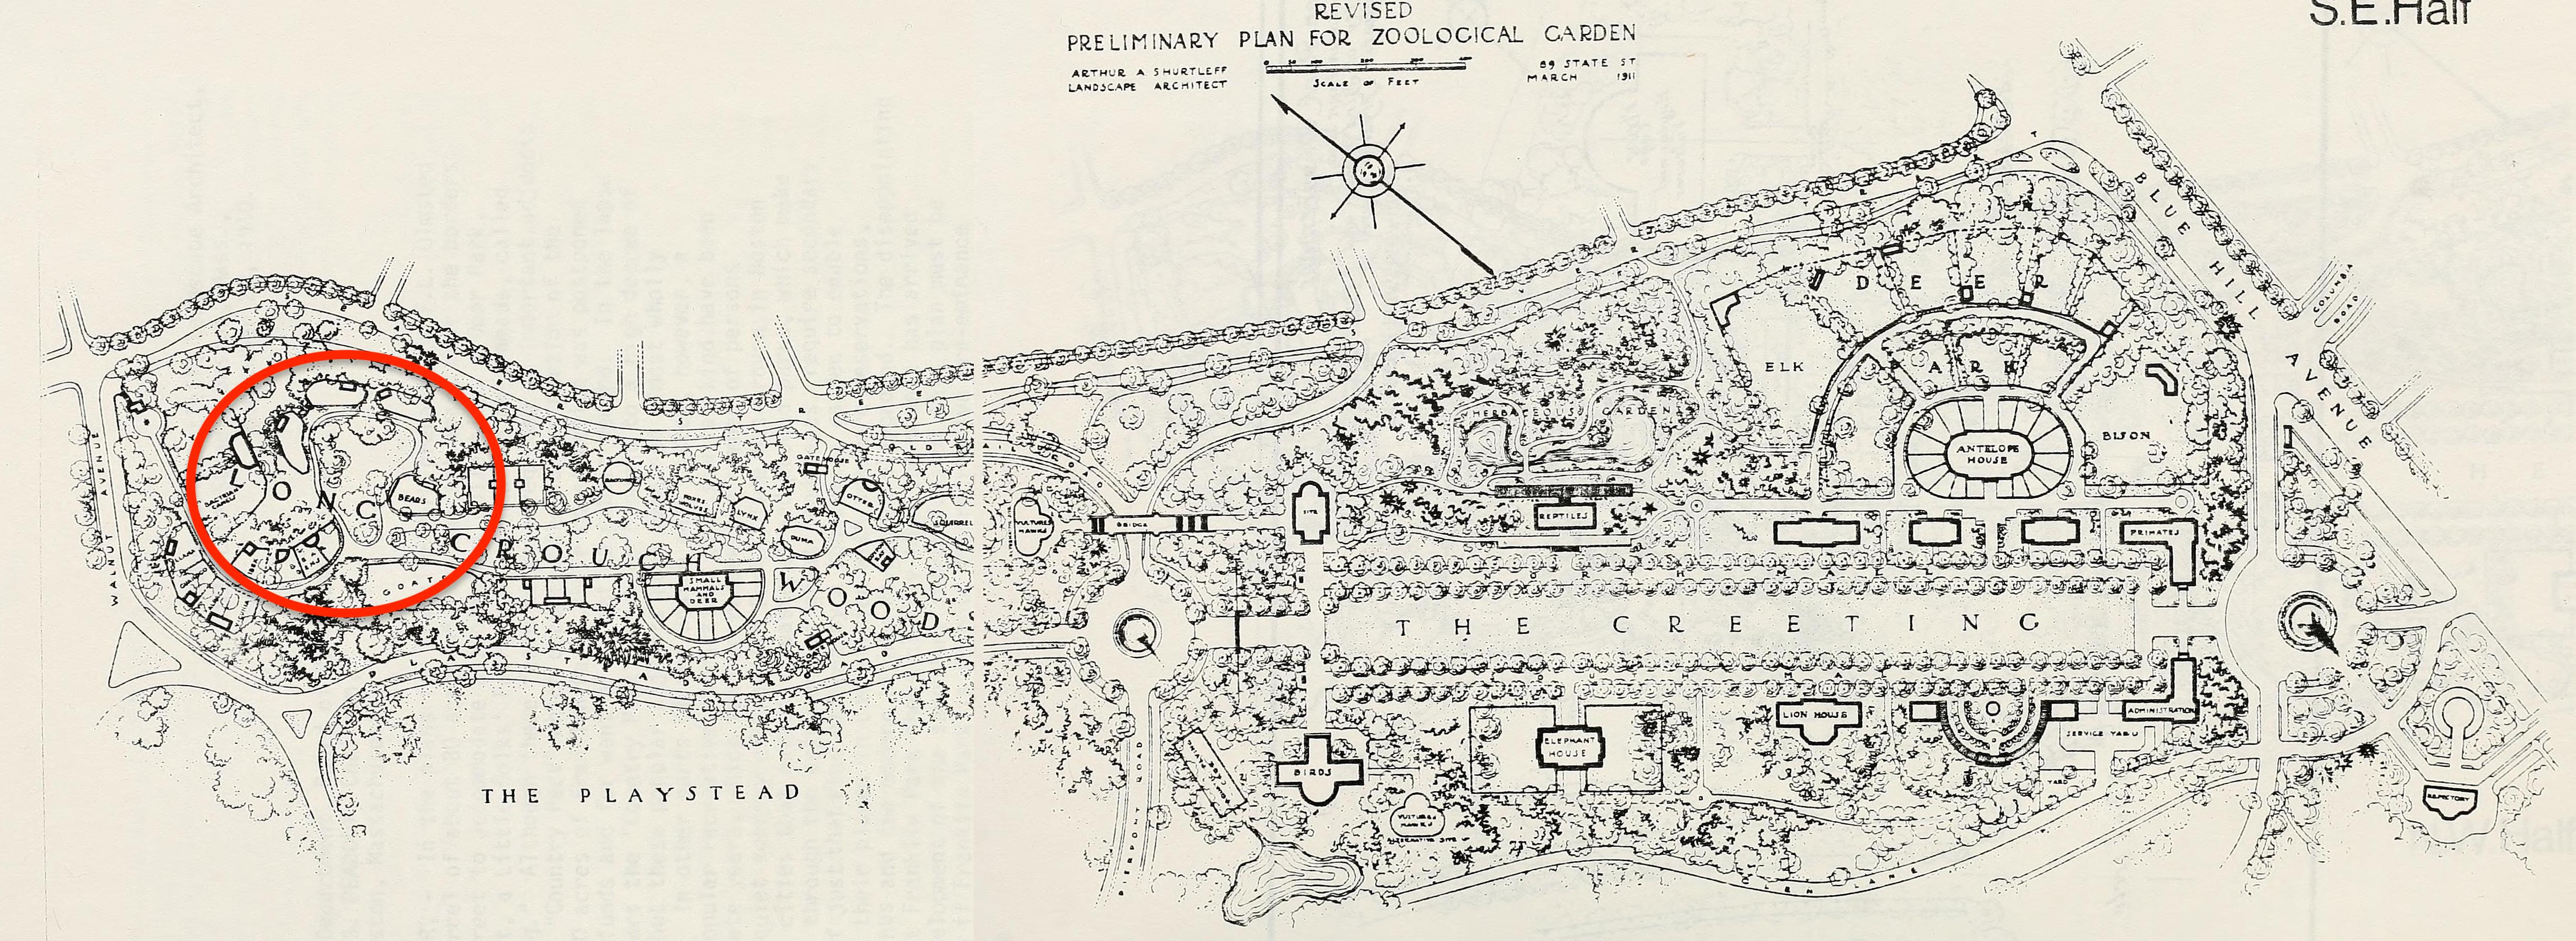 Arthur Shurtleff's 1911 plan for the Franklin Park Zoo, showing the location of the bear enclosures in the northwest portion.